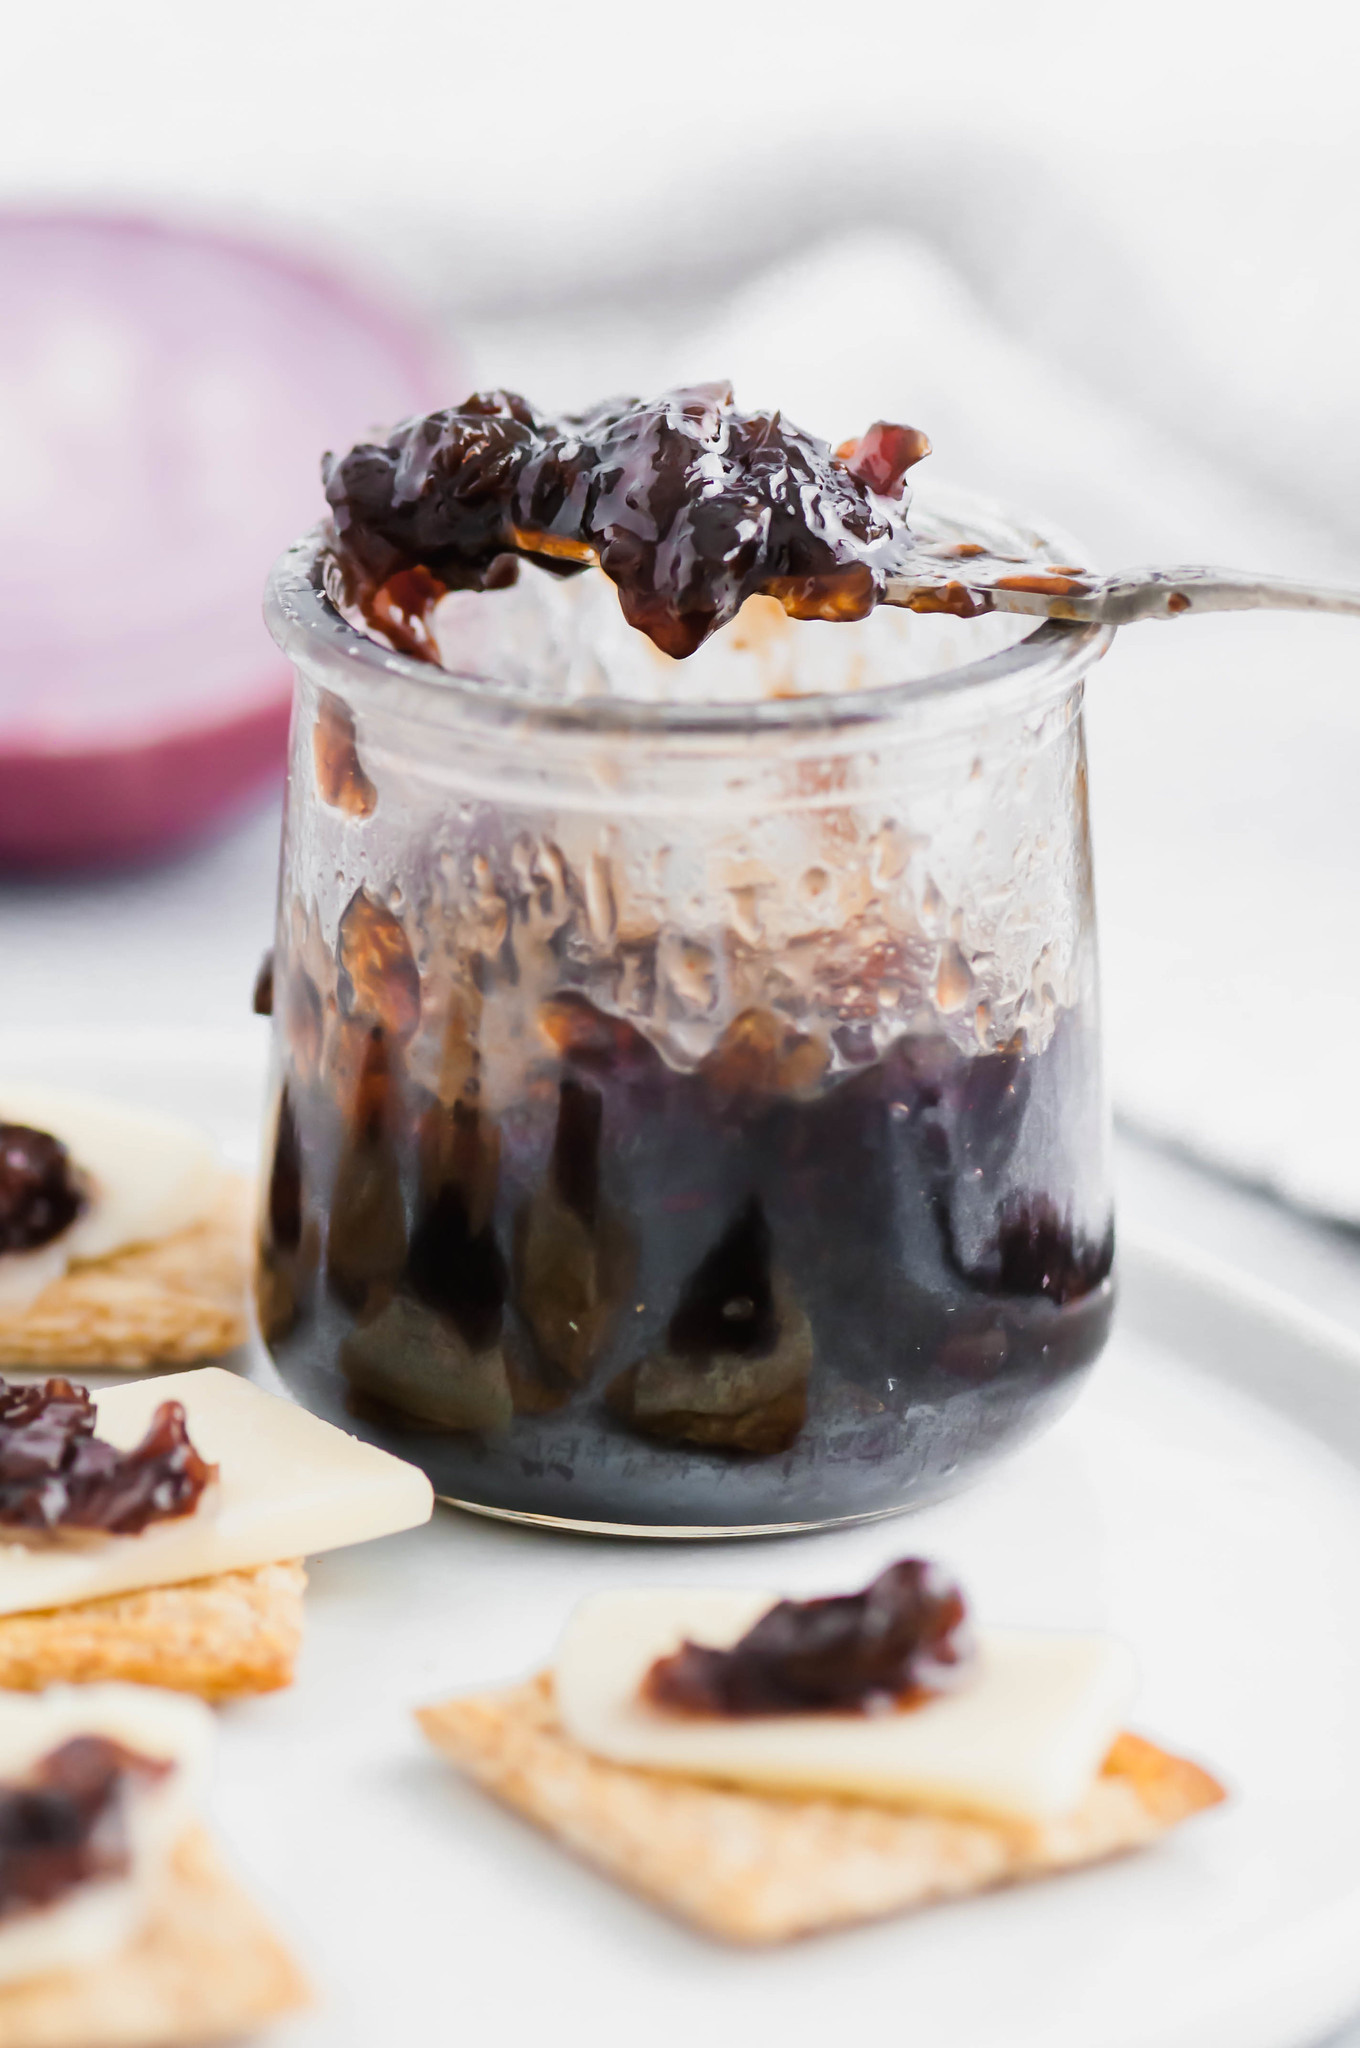 Bacon Onion Jam is a delicious, sweet and savory condiment that is going to blow your mind. Smoky bacon, red onions, sugar and vinegar are cooked down to create a thick, caramelized jam that is delicious on crackers, sandwiches, brie and more. 